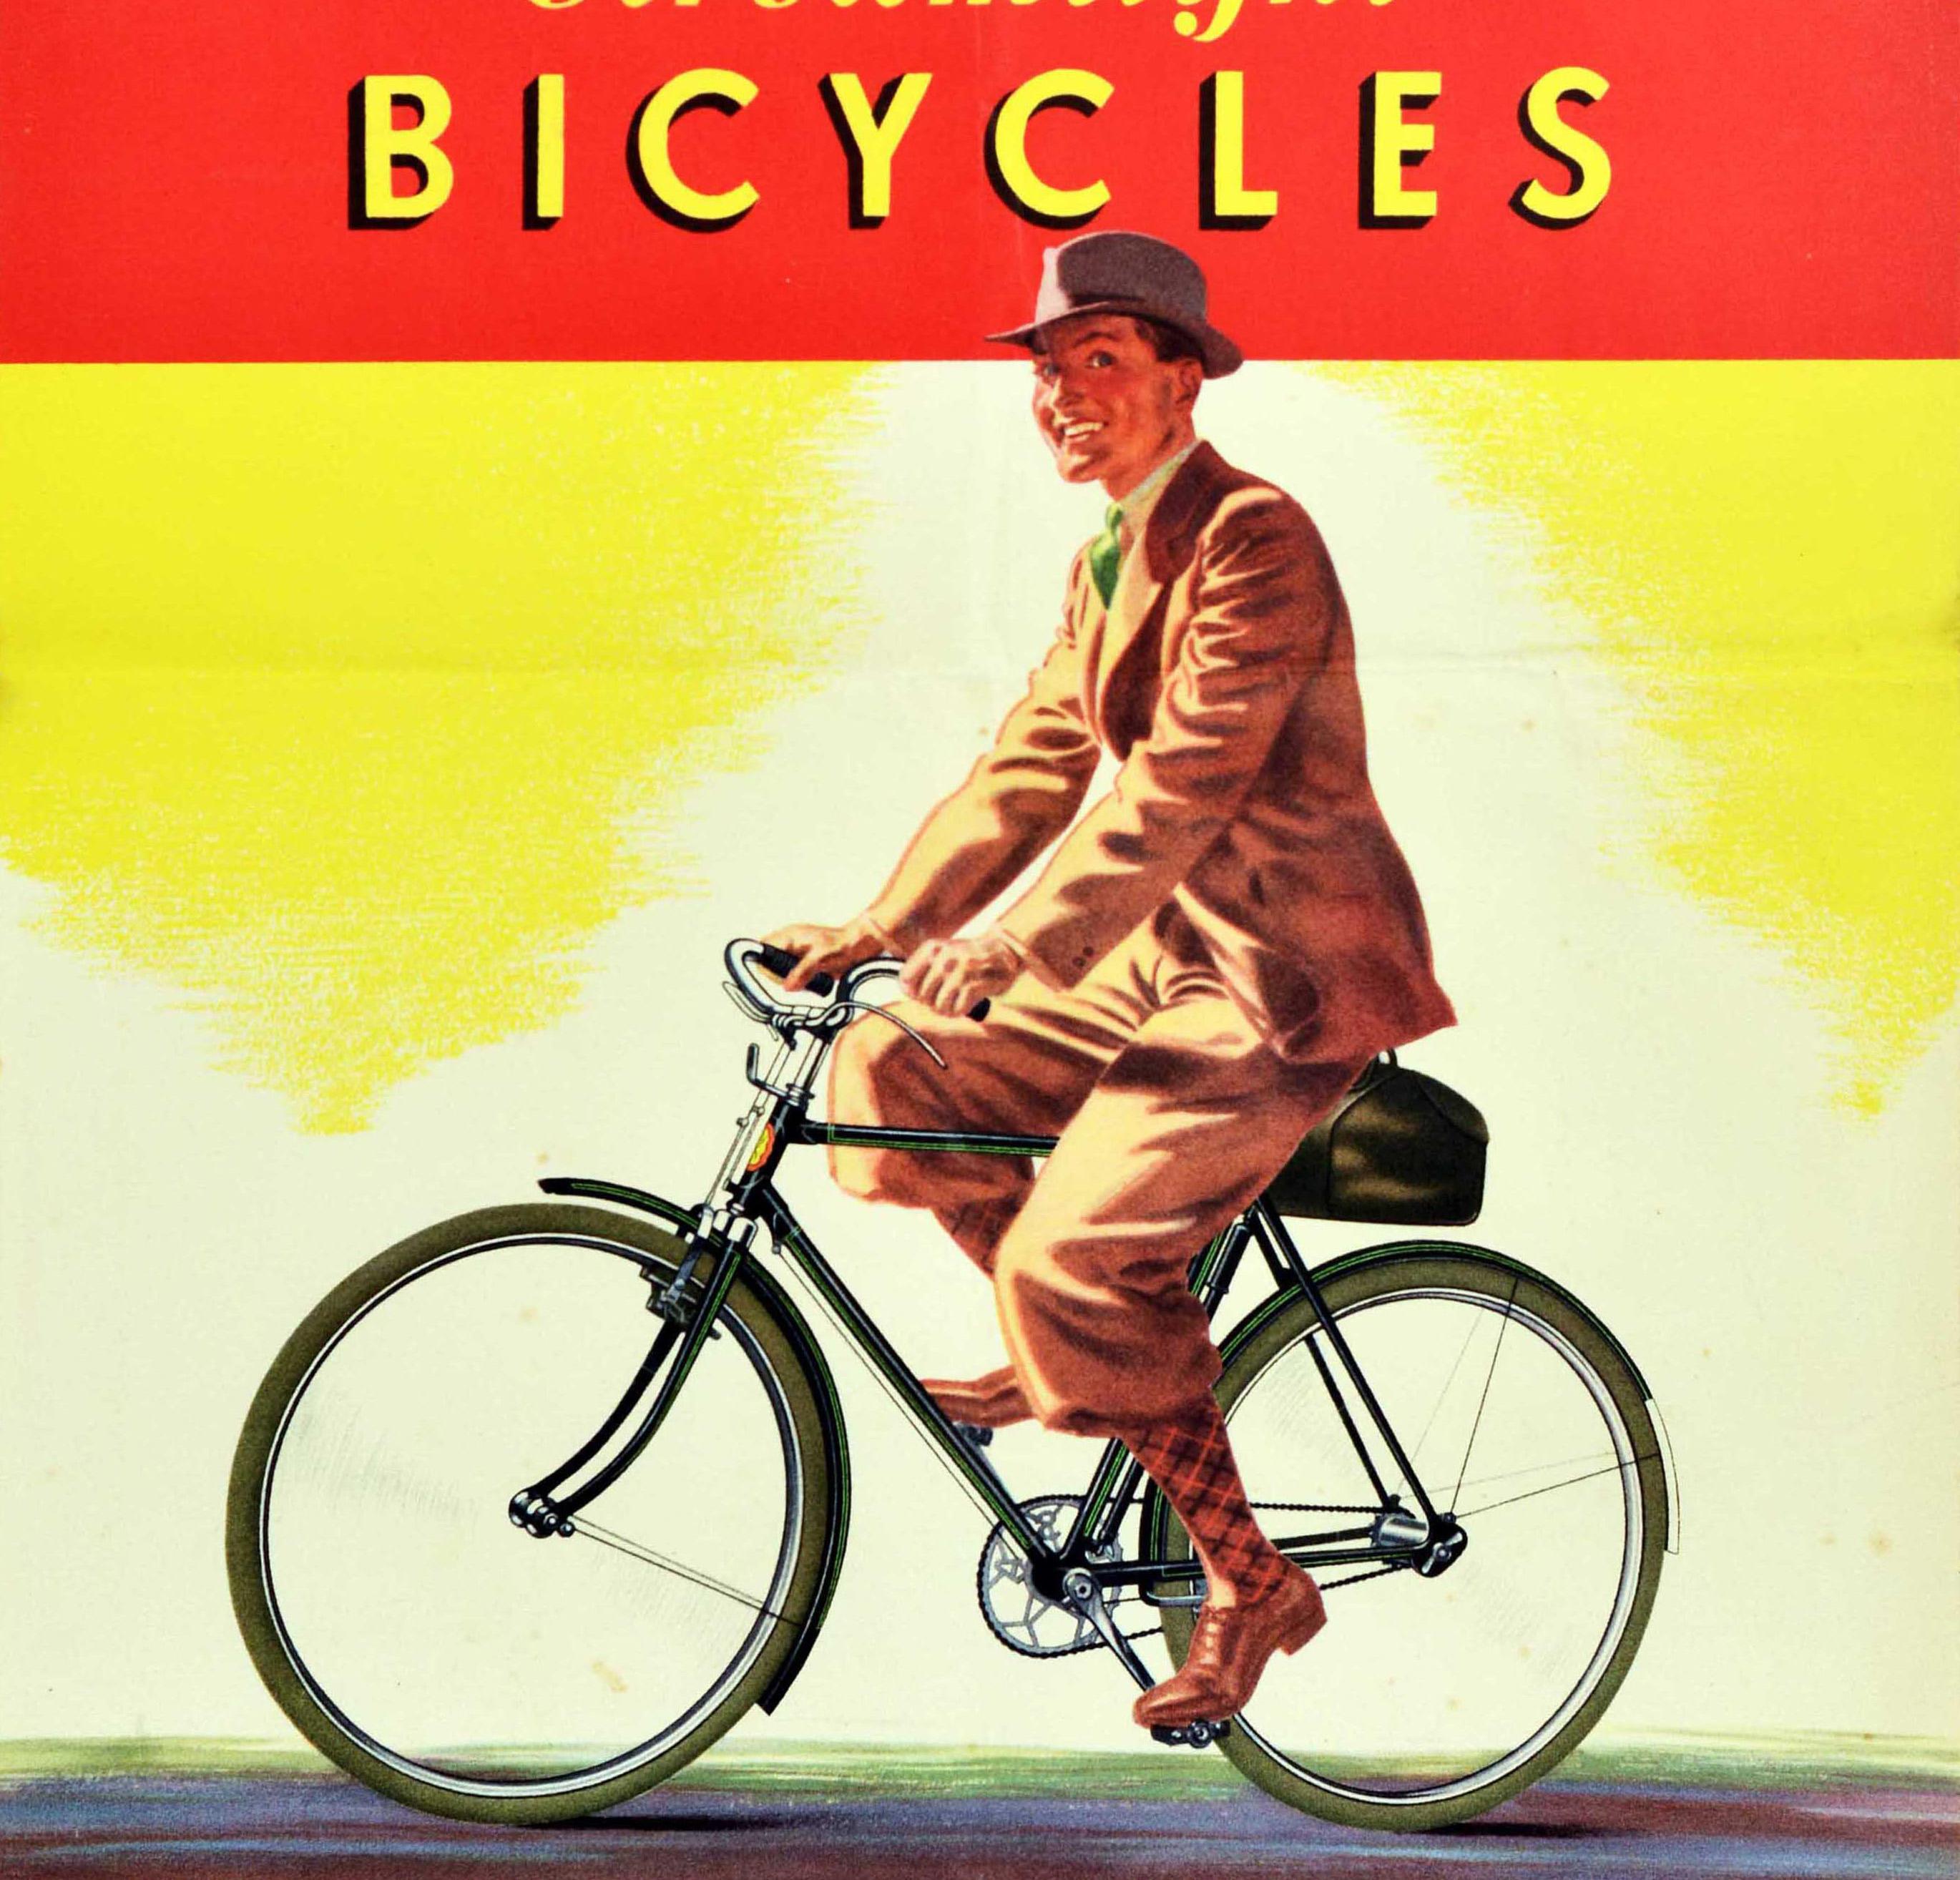 Original Vintage Advertising Poster BSA Steamlight Bicycles Cycling Design Art - Print by Unknown